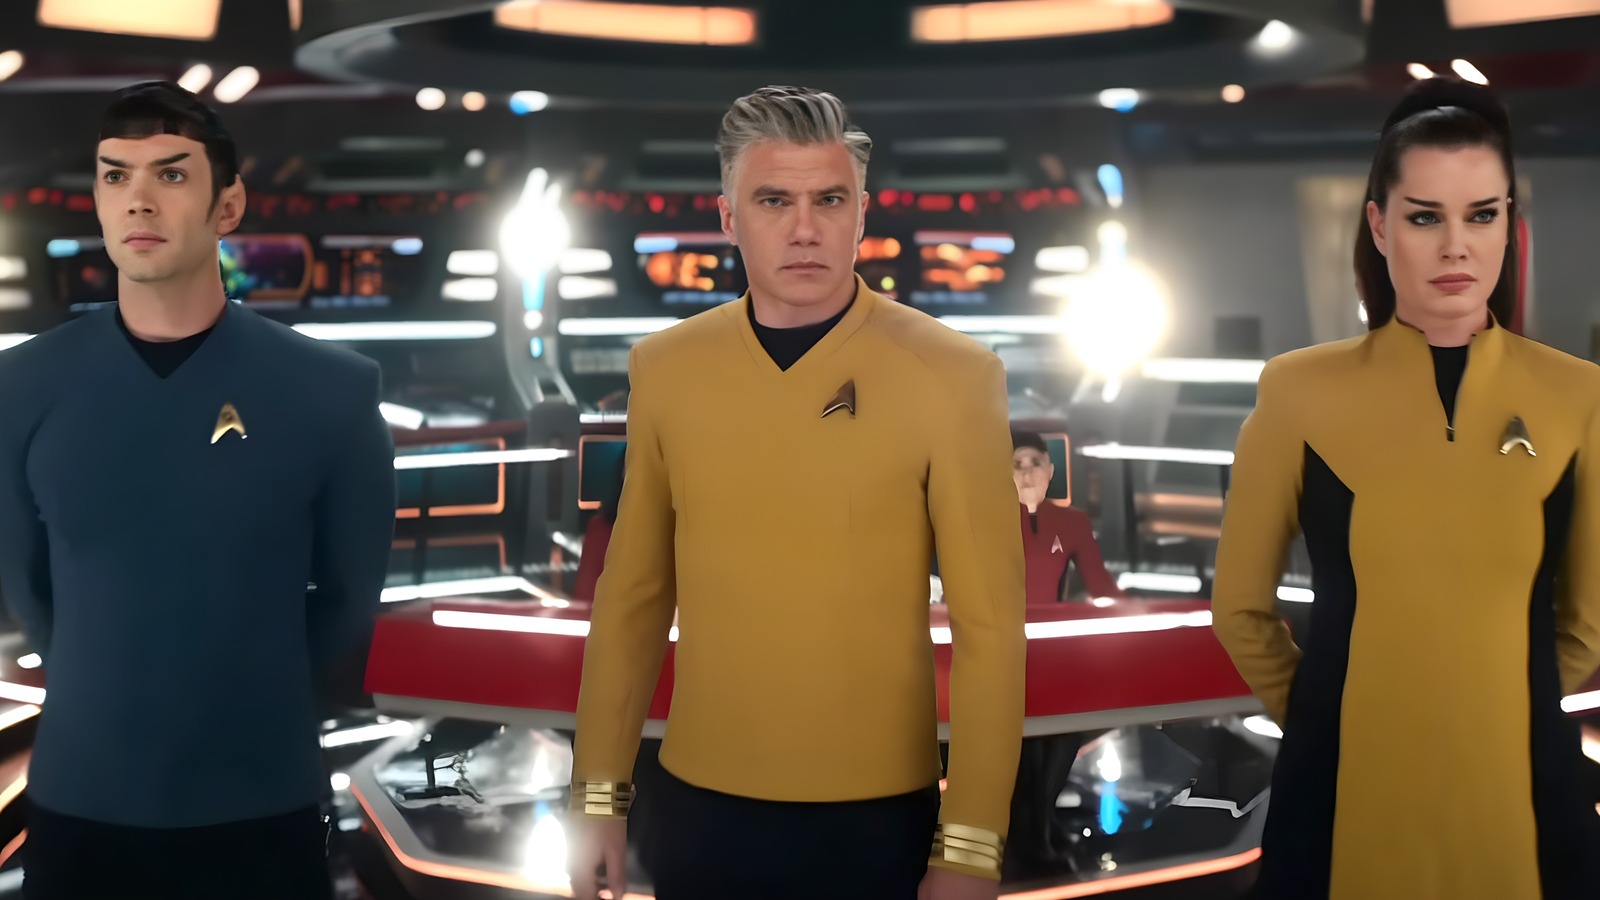 Discover how Star Trek Producers Mastered the Rule for Strange New Worlds